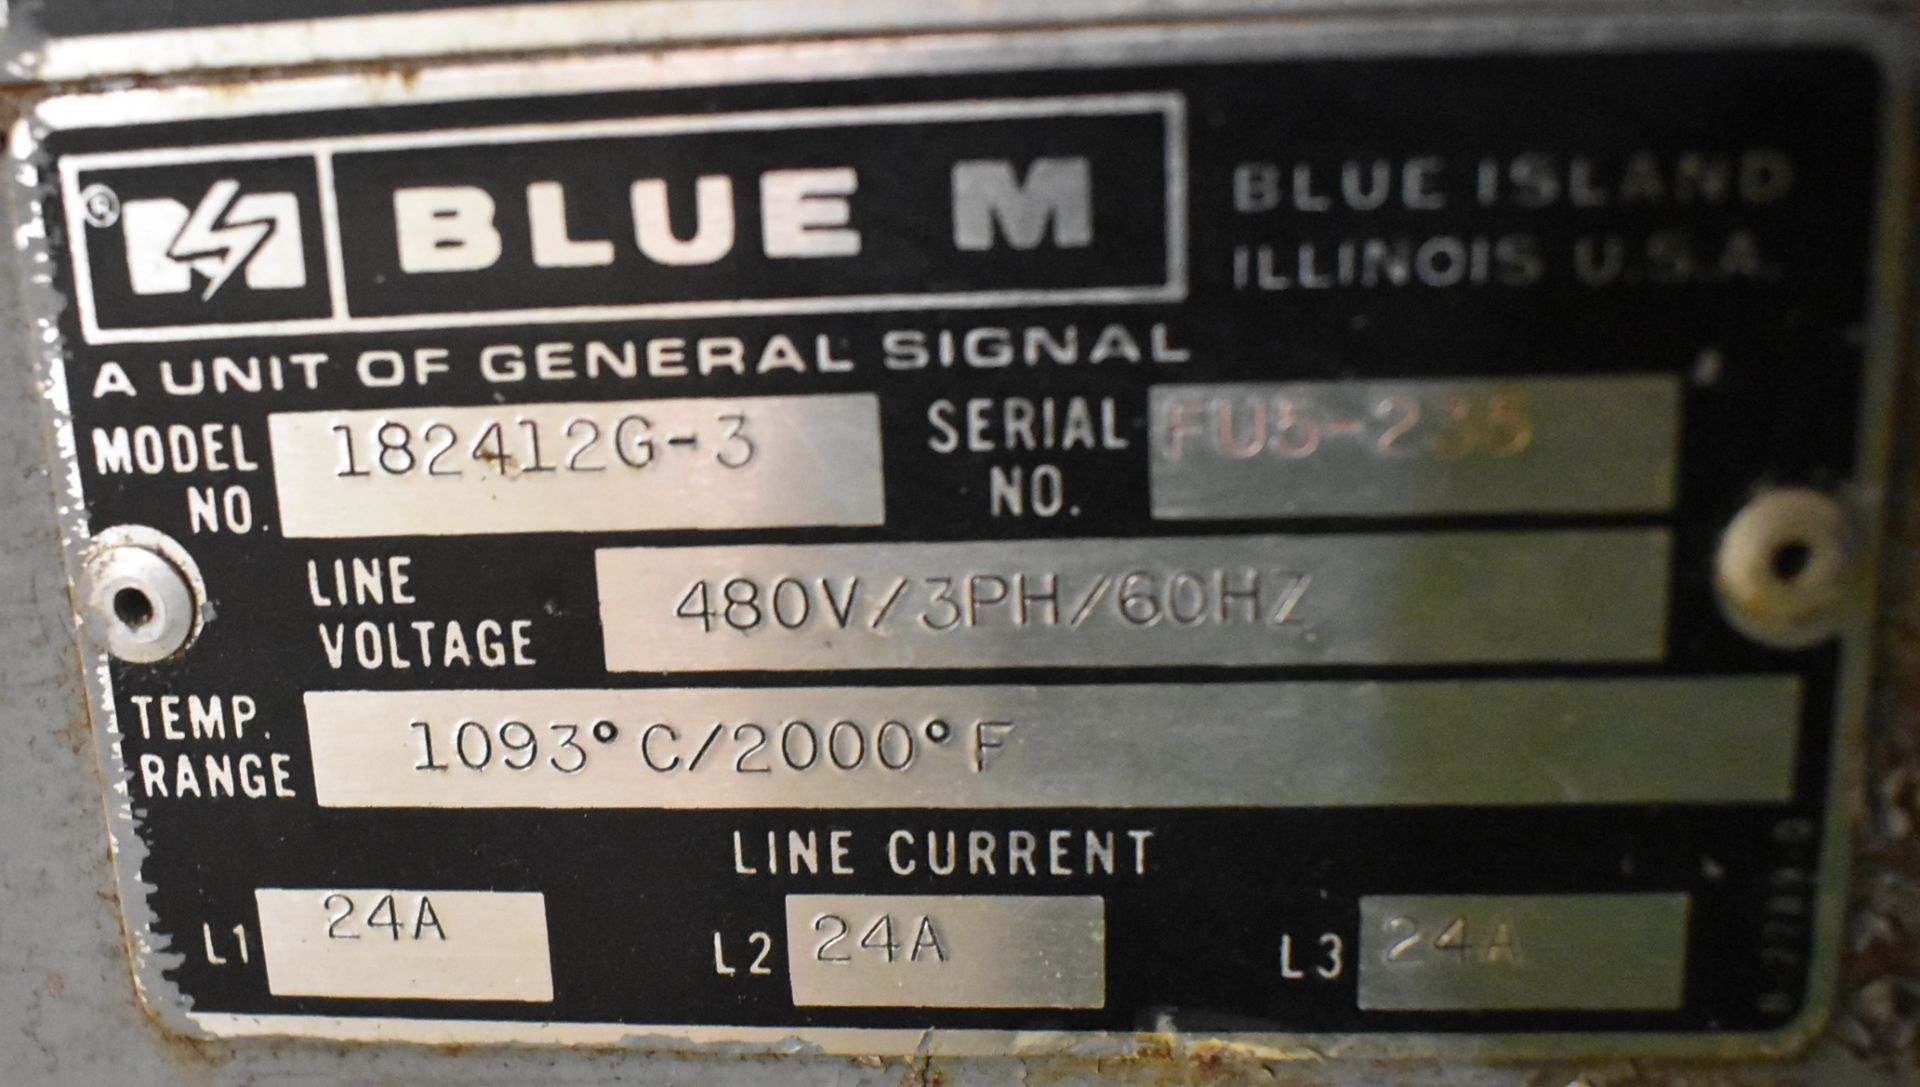 BLUE M 182412G-3 ELECTRIC BOX FURNACE WITH 2000 DEG. F. MAX. TEMPERATURE, 18"X12"X24"D INTERIOR - Image 4 of 4